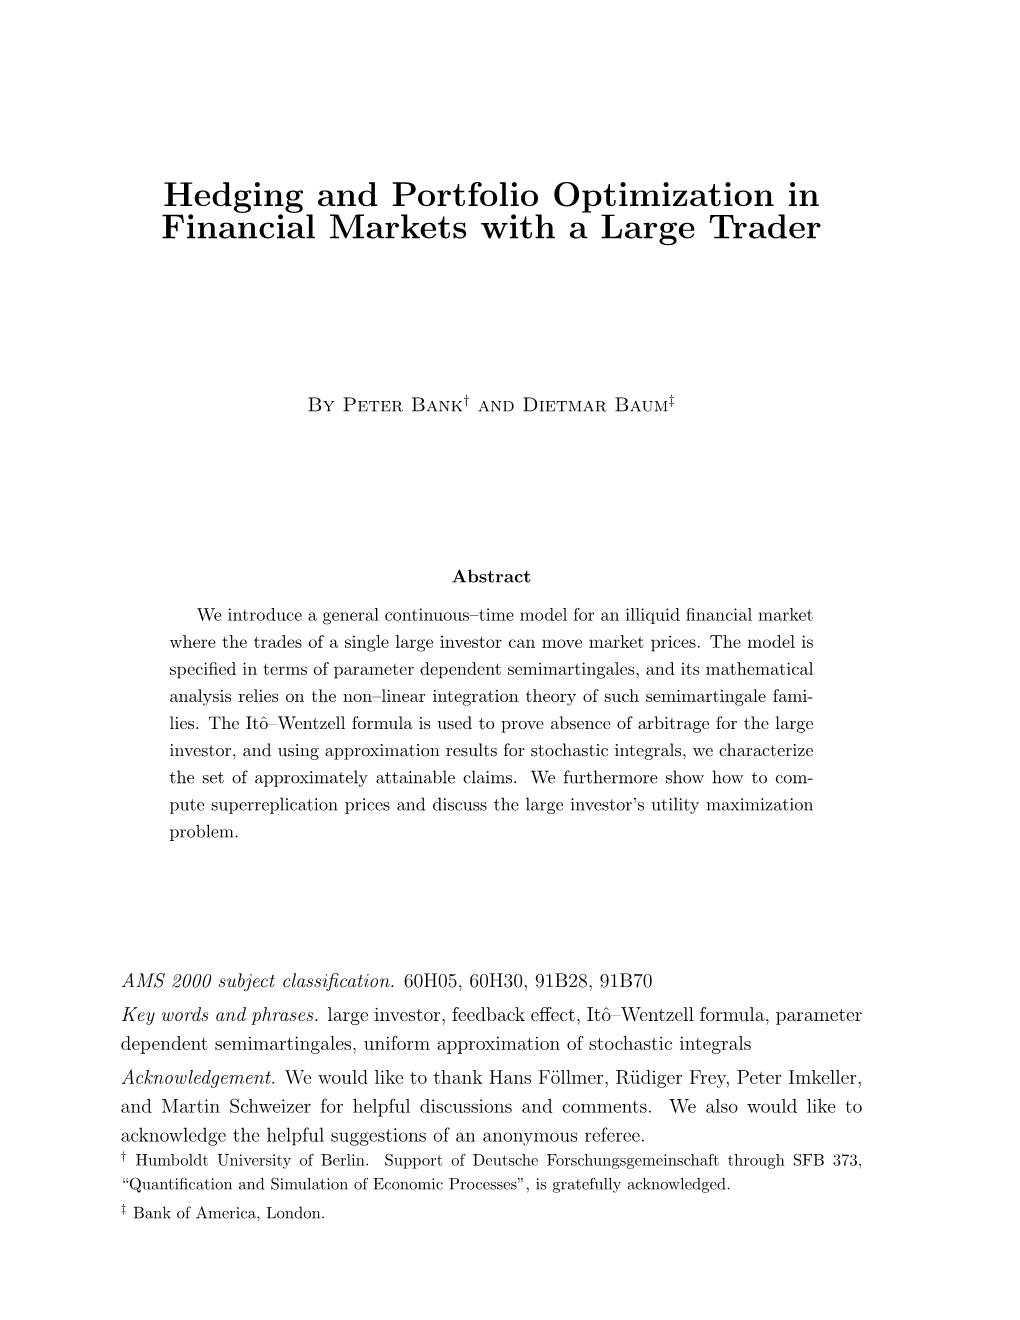 Hedging and Portfolio Optimization in Financial Markets with a Large Trader